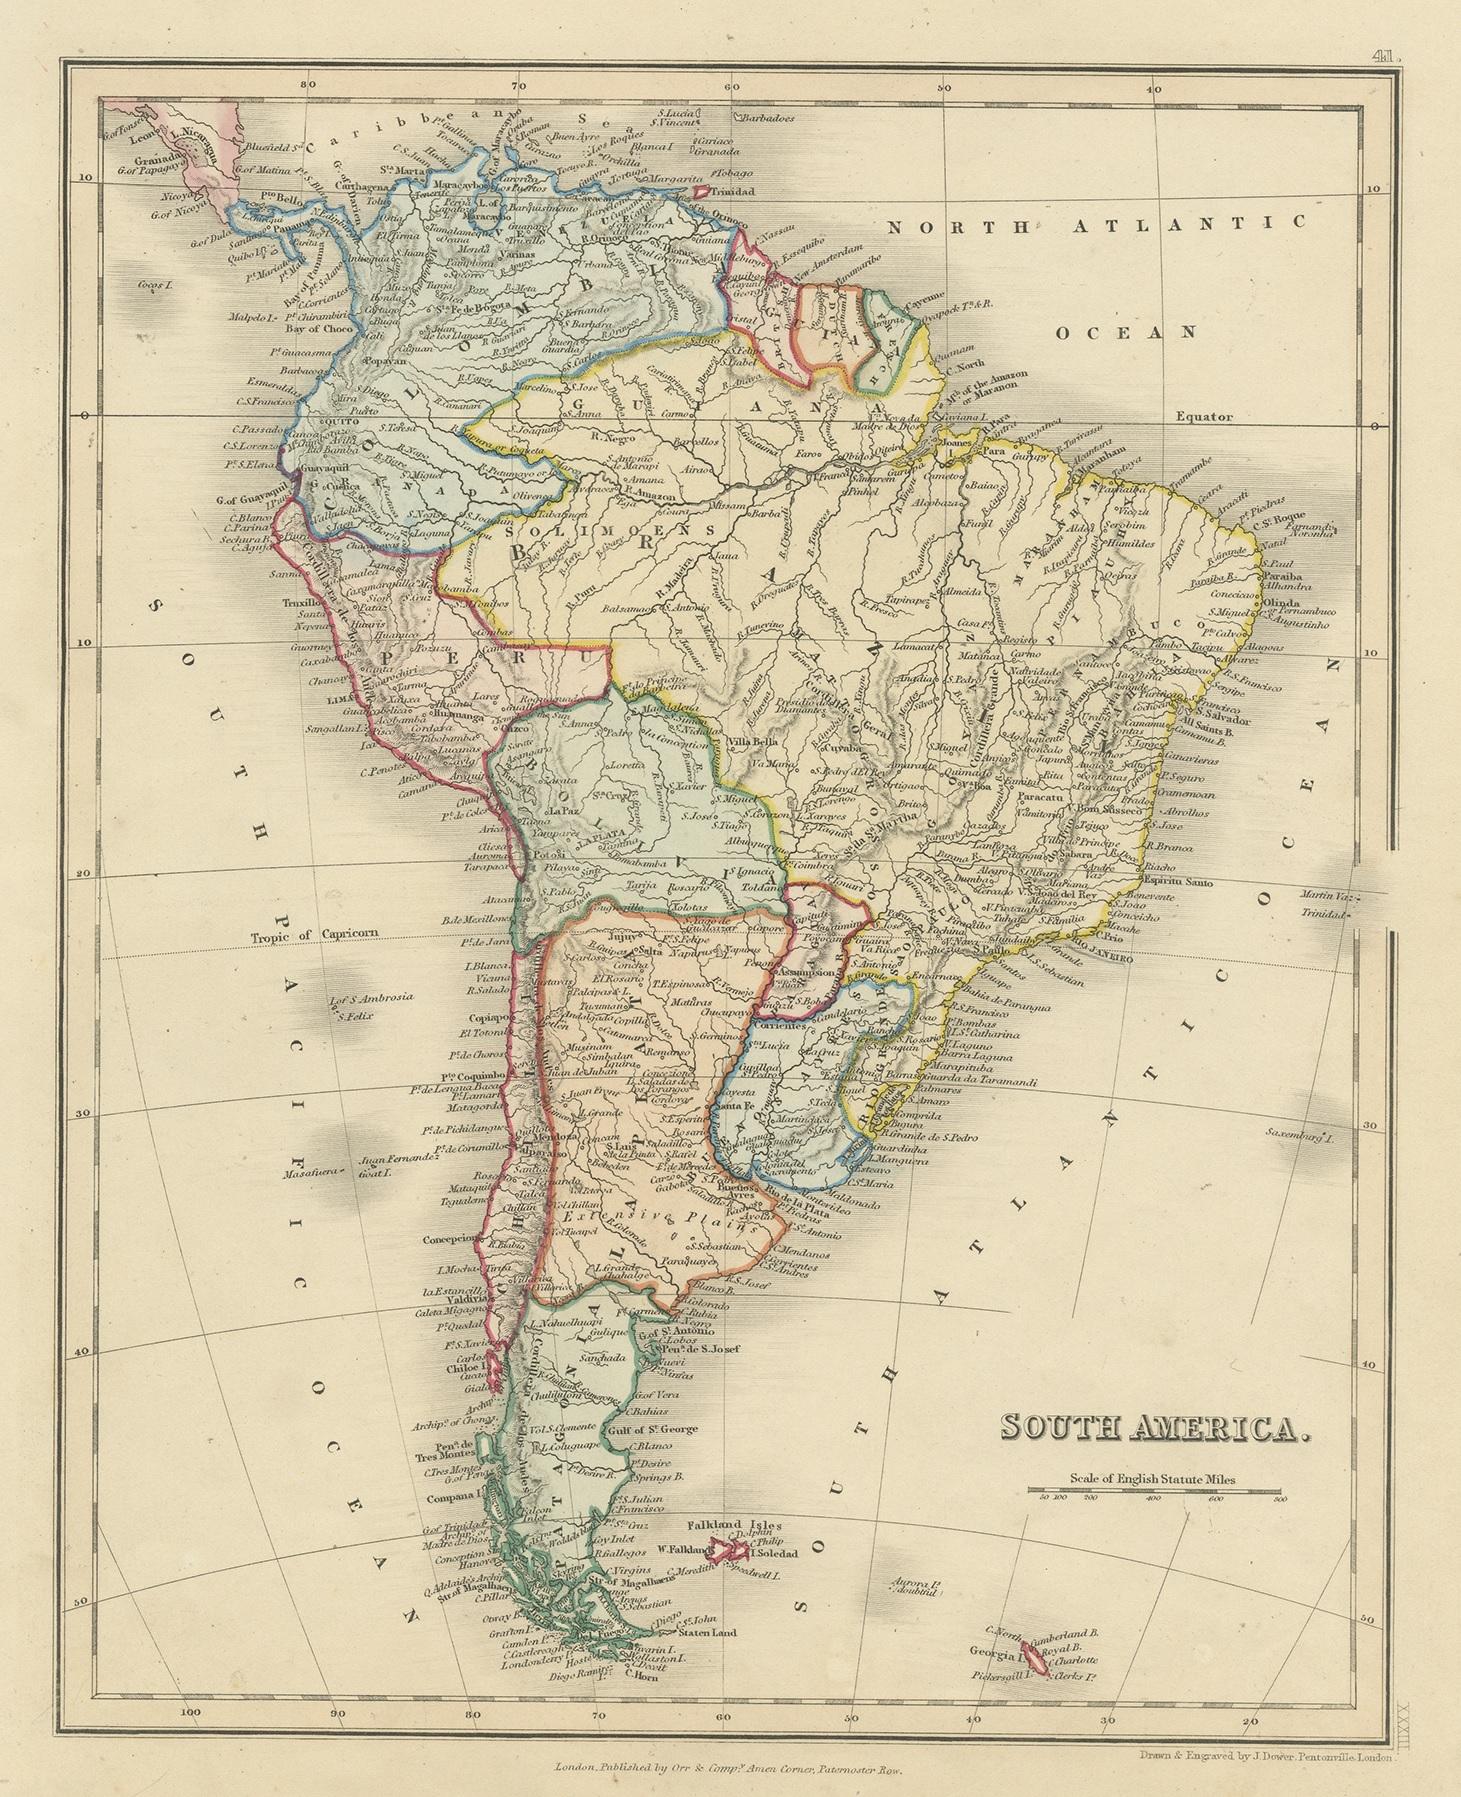 Antique map titled 'South America'. Old map of South America. Published by Orr & Company, Amen Corner, Paternoster Row, London.